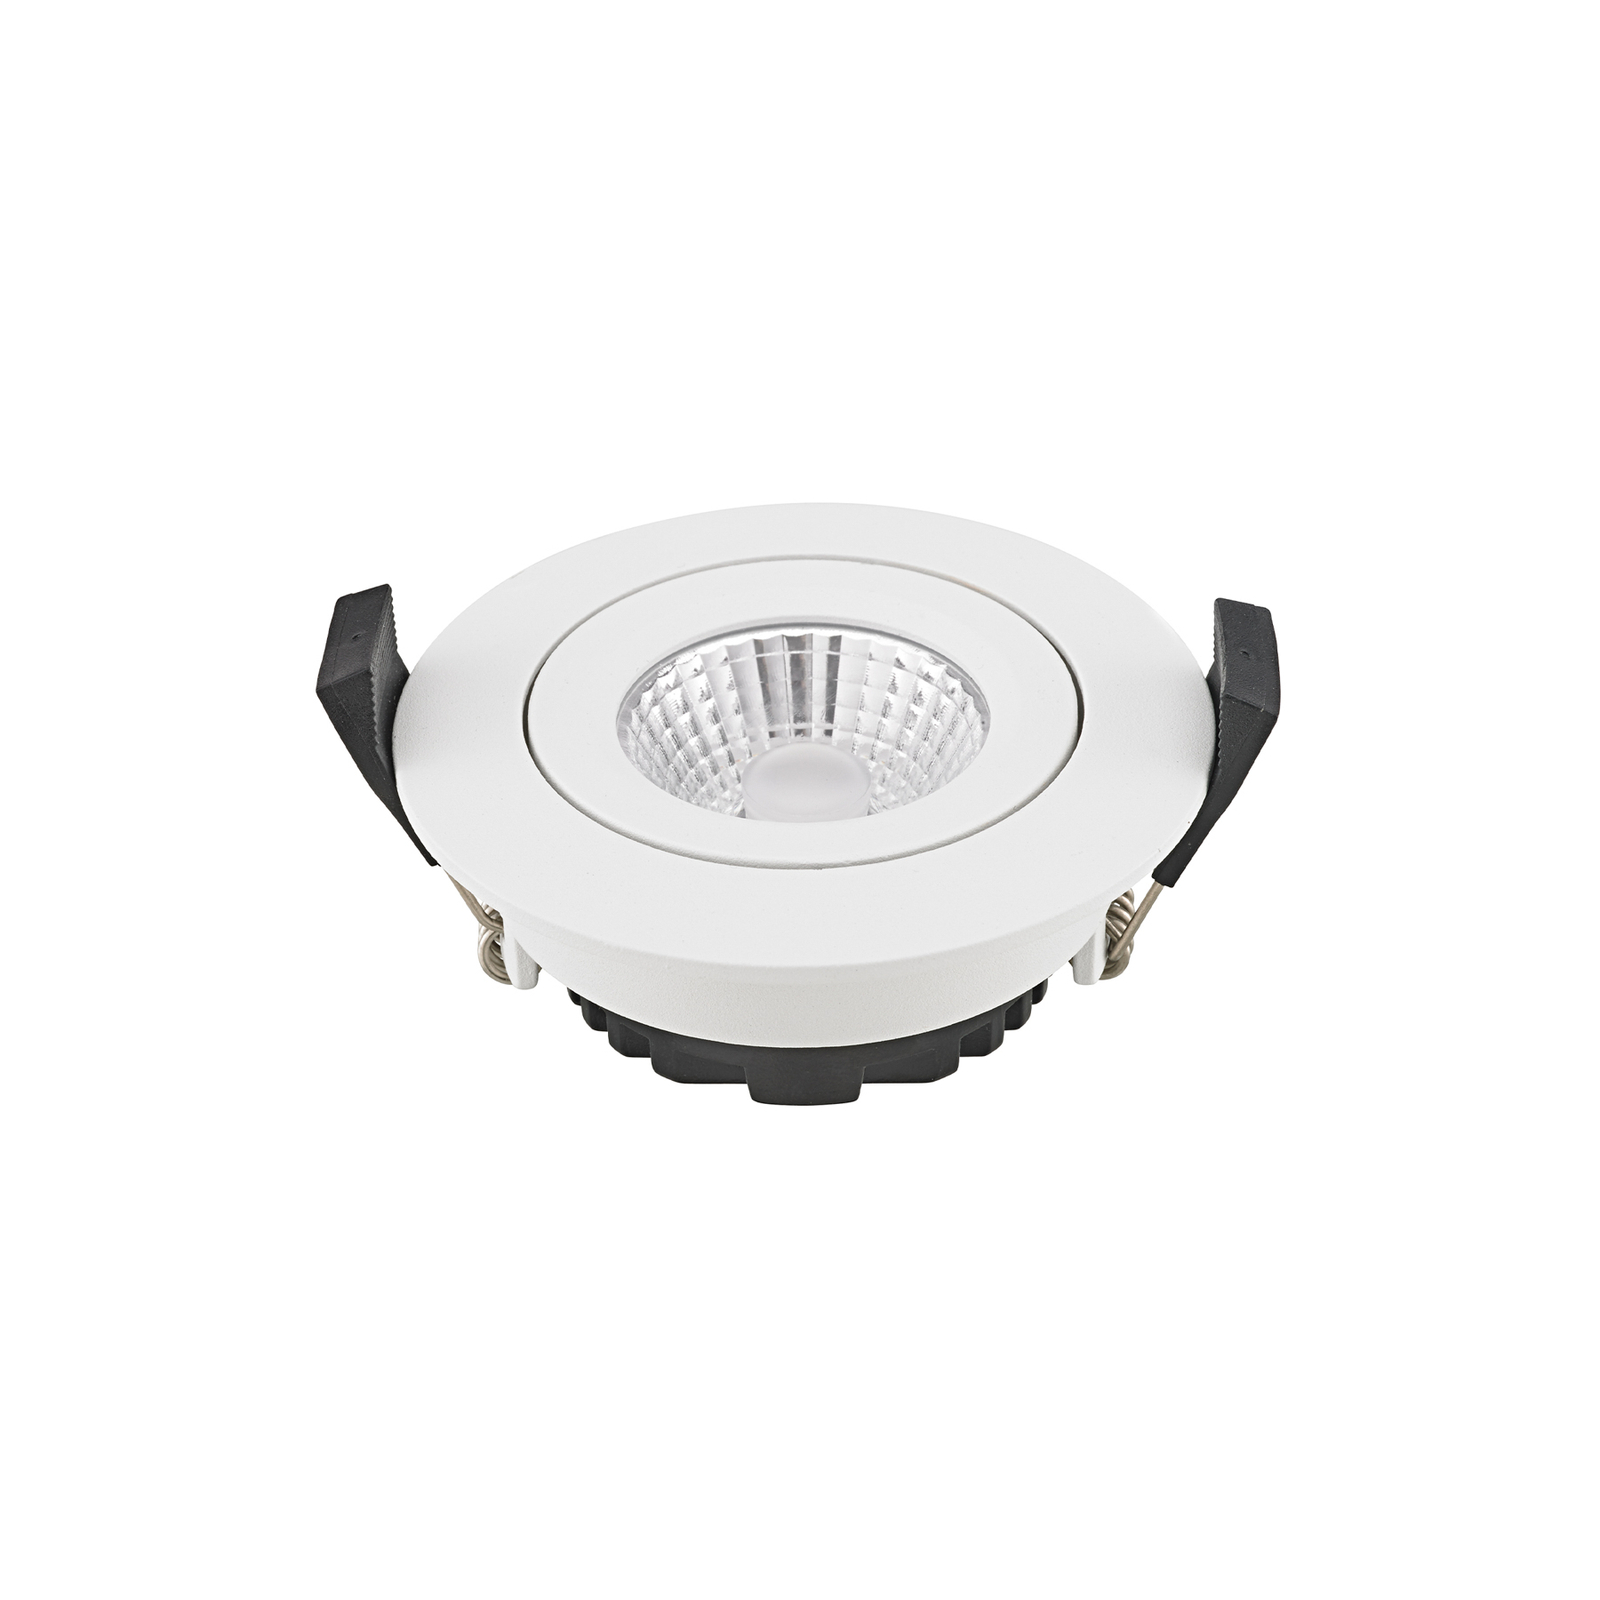 Diled LED recessed ceiling spotlight, Ø 8.5 cm, 6 W, dimmable, white